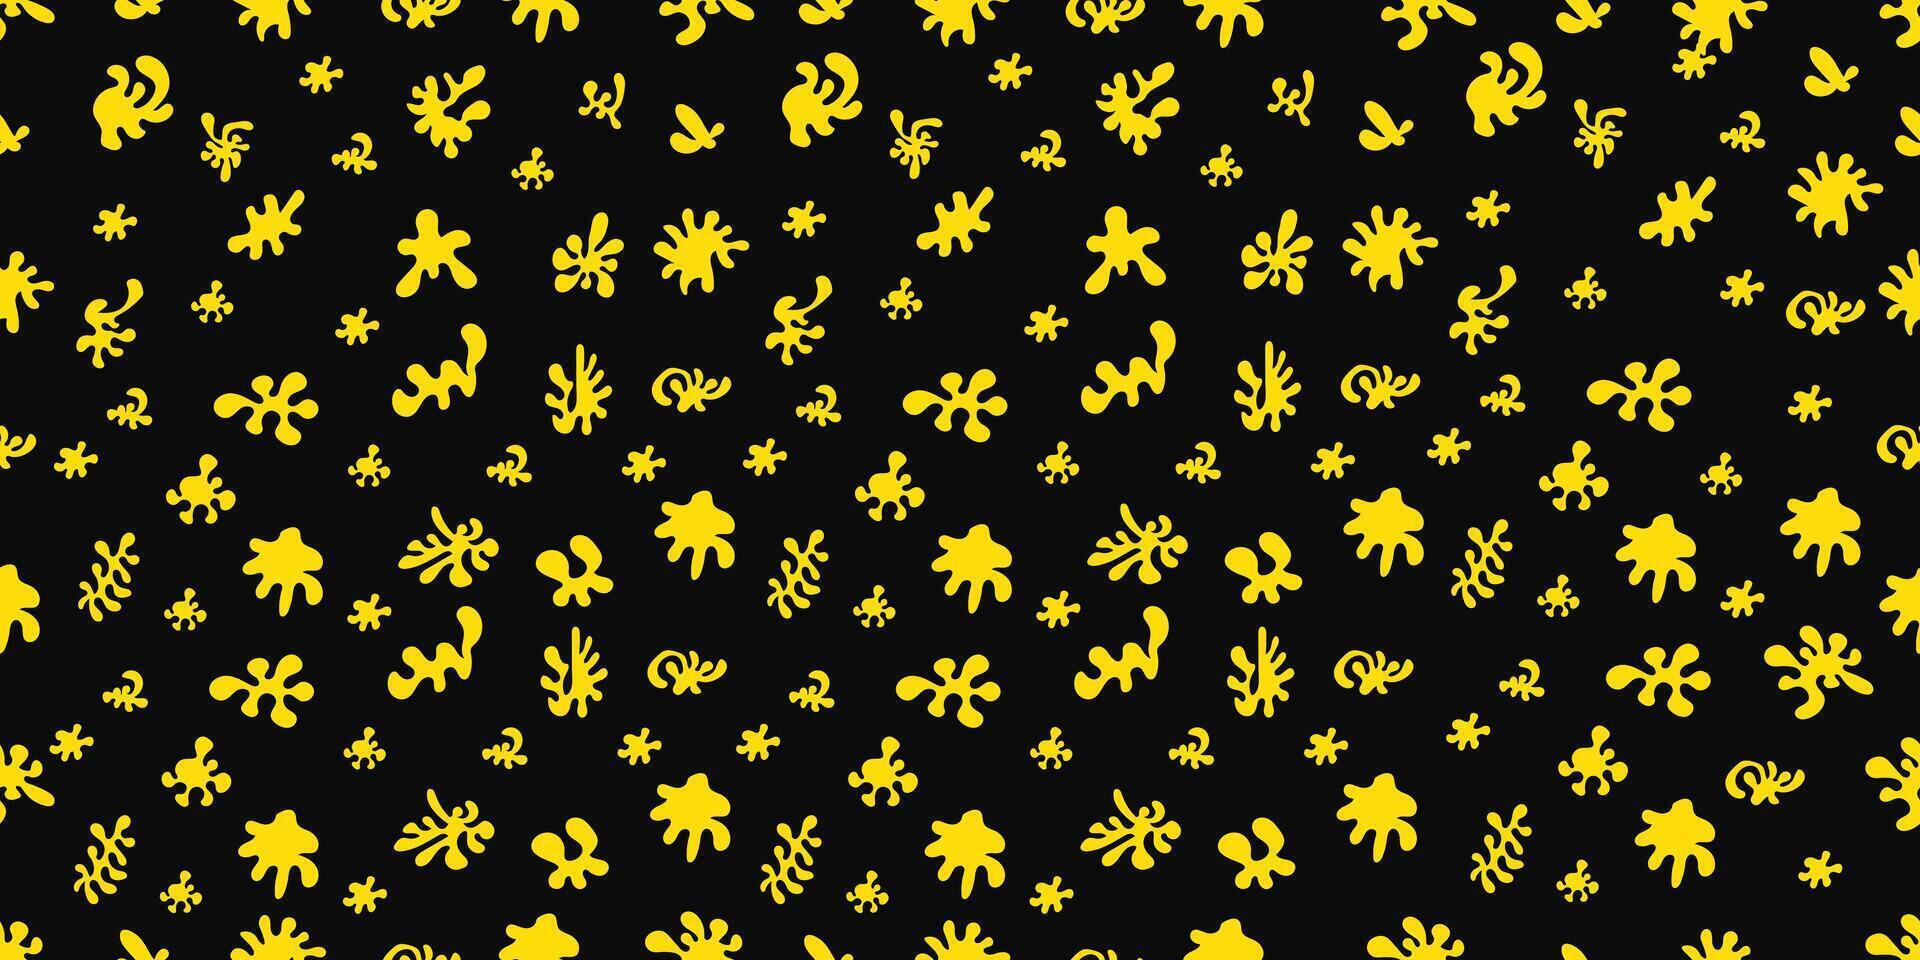 Vector wallpaper yellow spots, blots - background illustration. Template for textile, wallpaper, packaging, cover, web, card, box, print, banner, ceramics